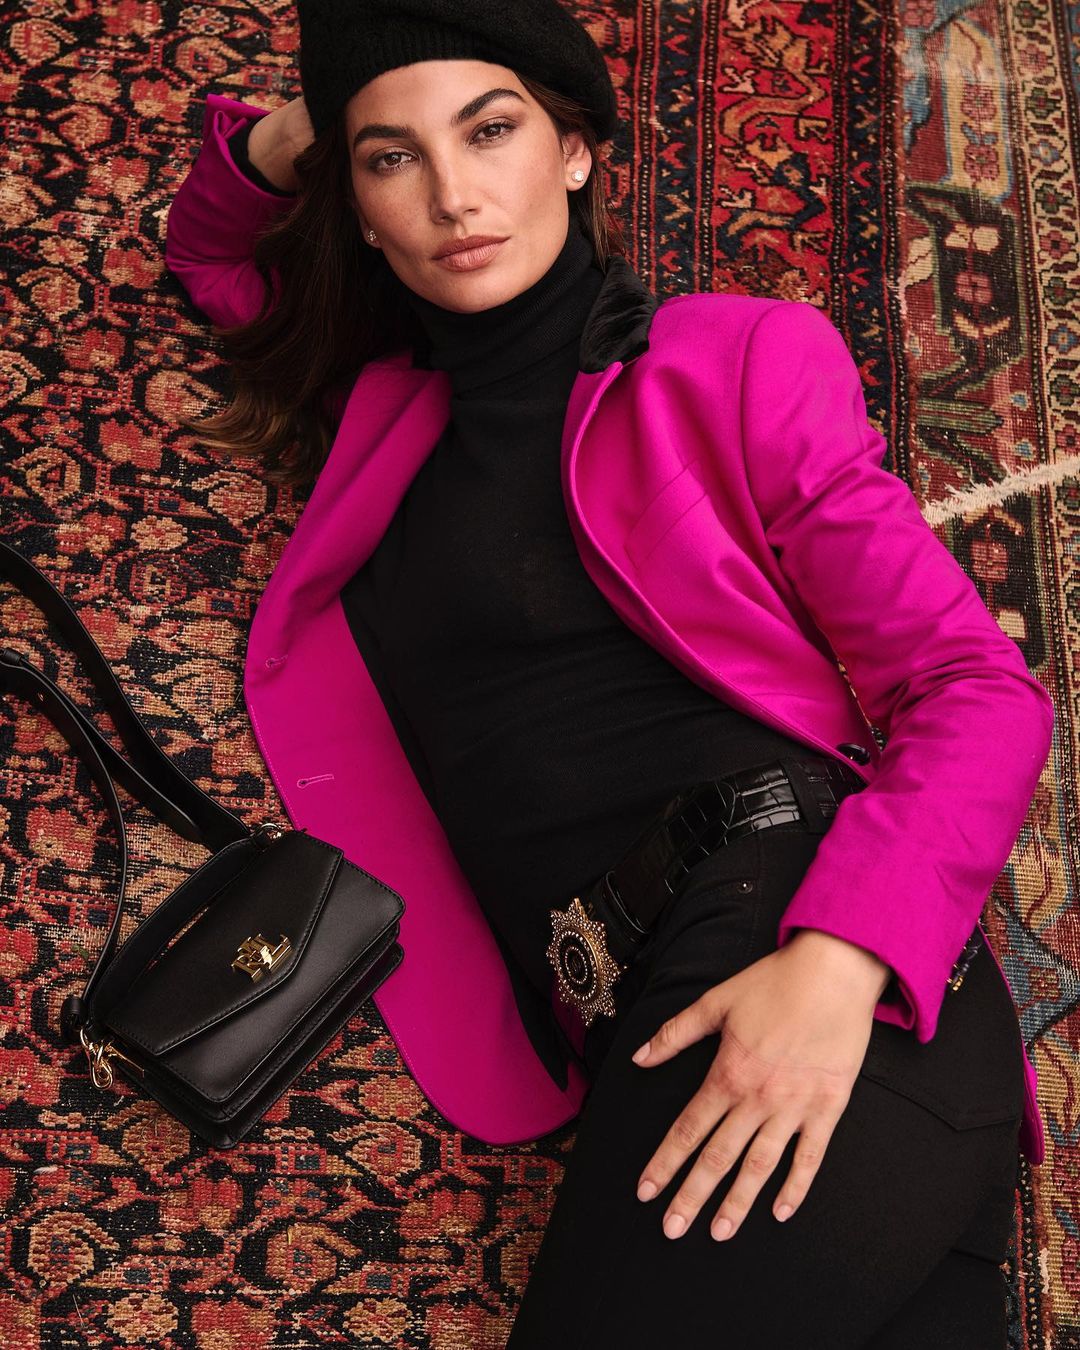 Portrait photoshoot of Lily Aldridge in a pink blazer and black beanie while lying on the carpeted floor beside a black purse